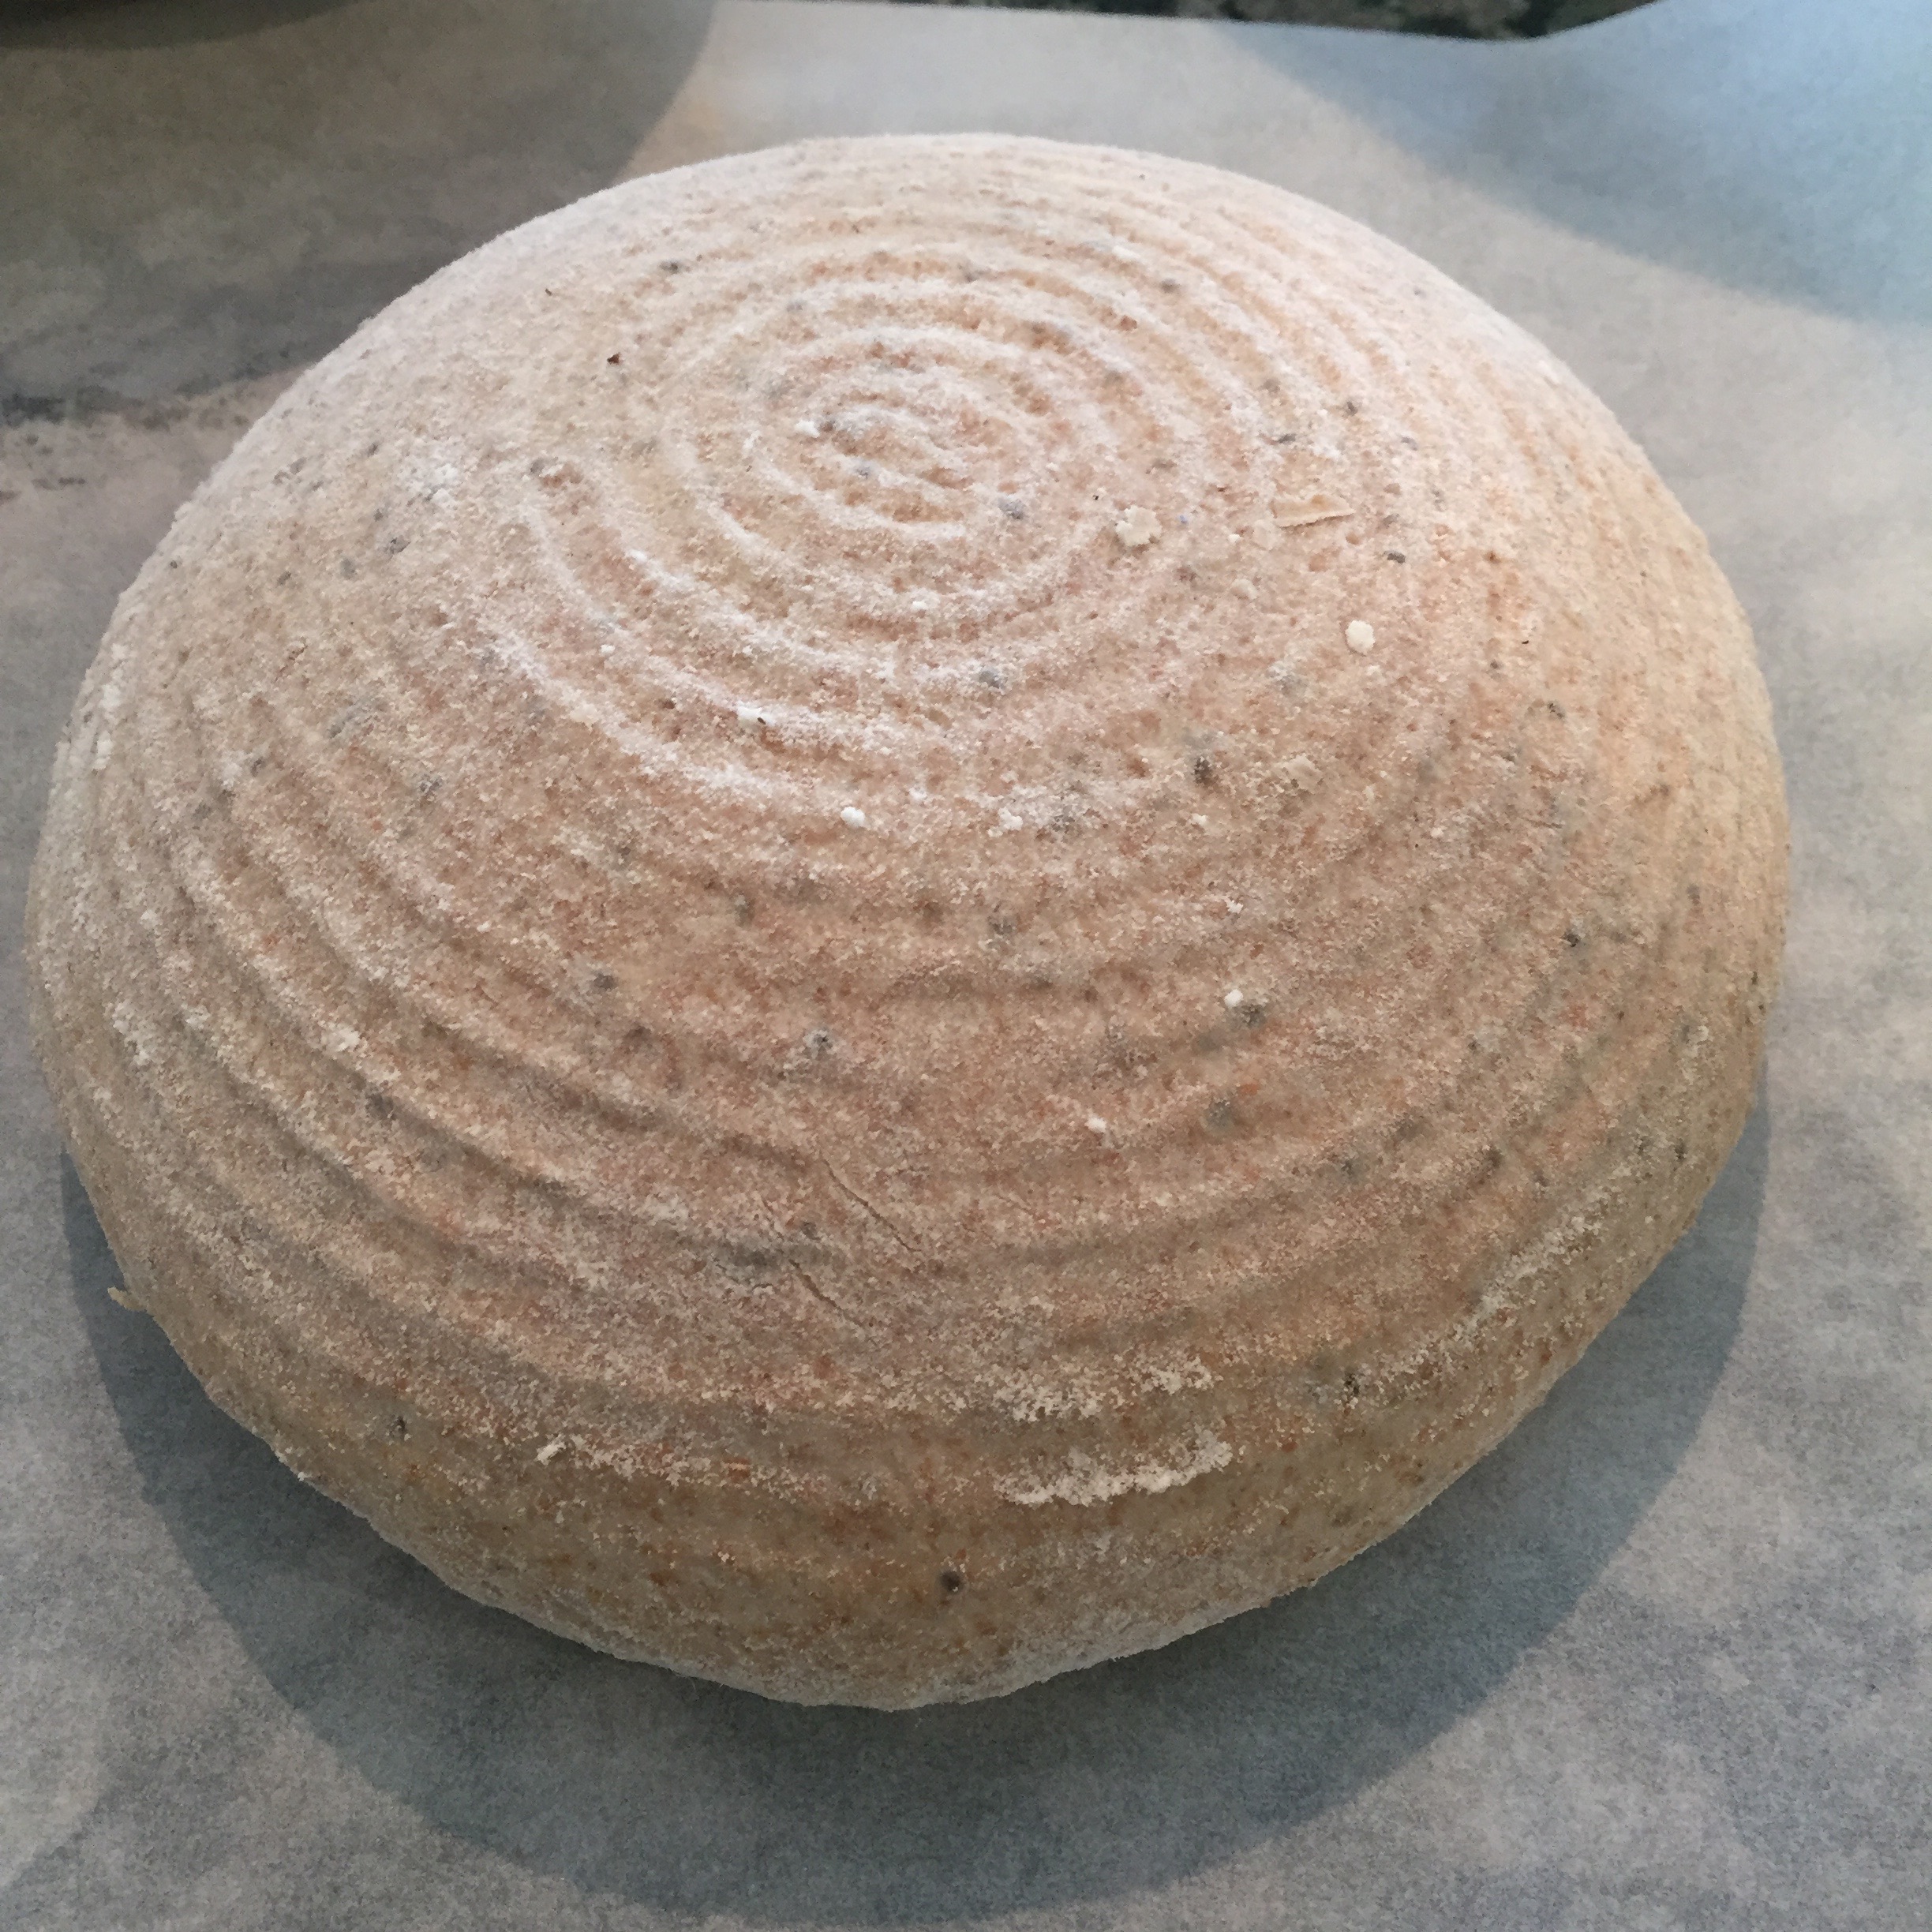 risen dough inside the banneton, and ready for baking.